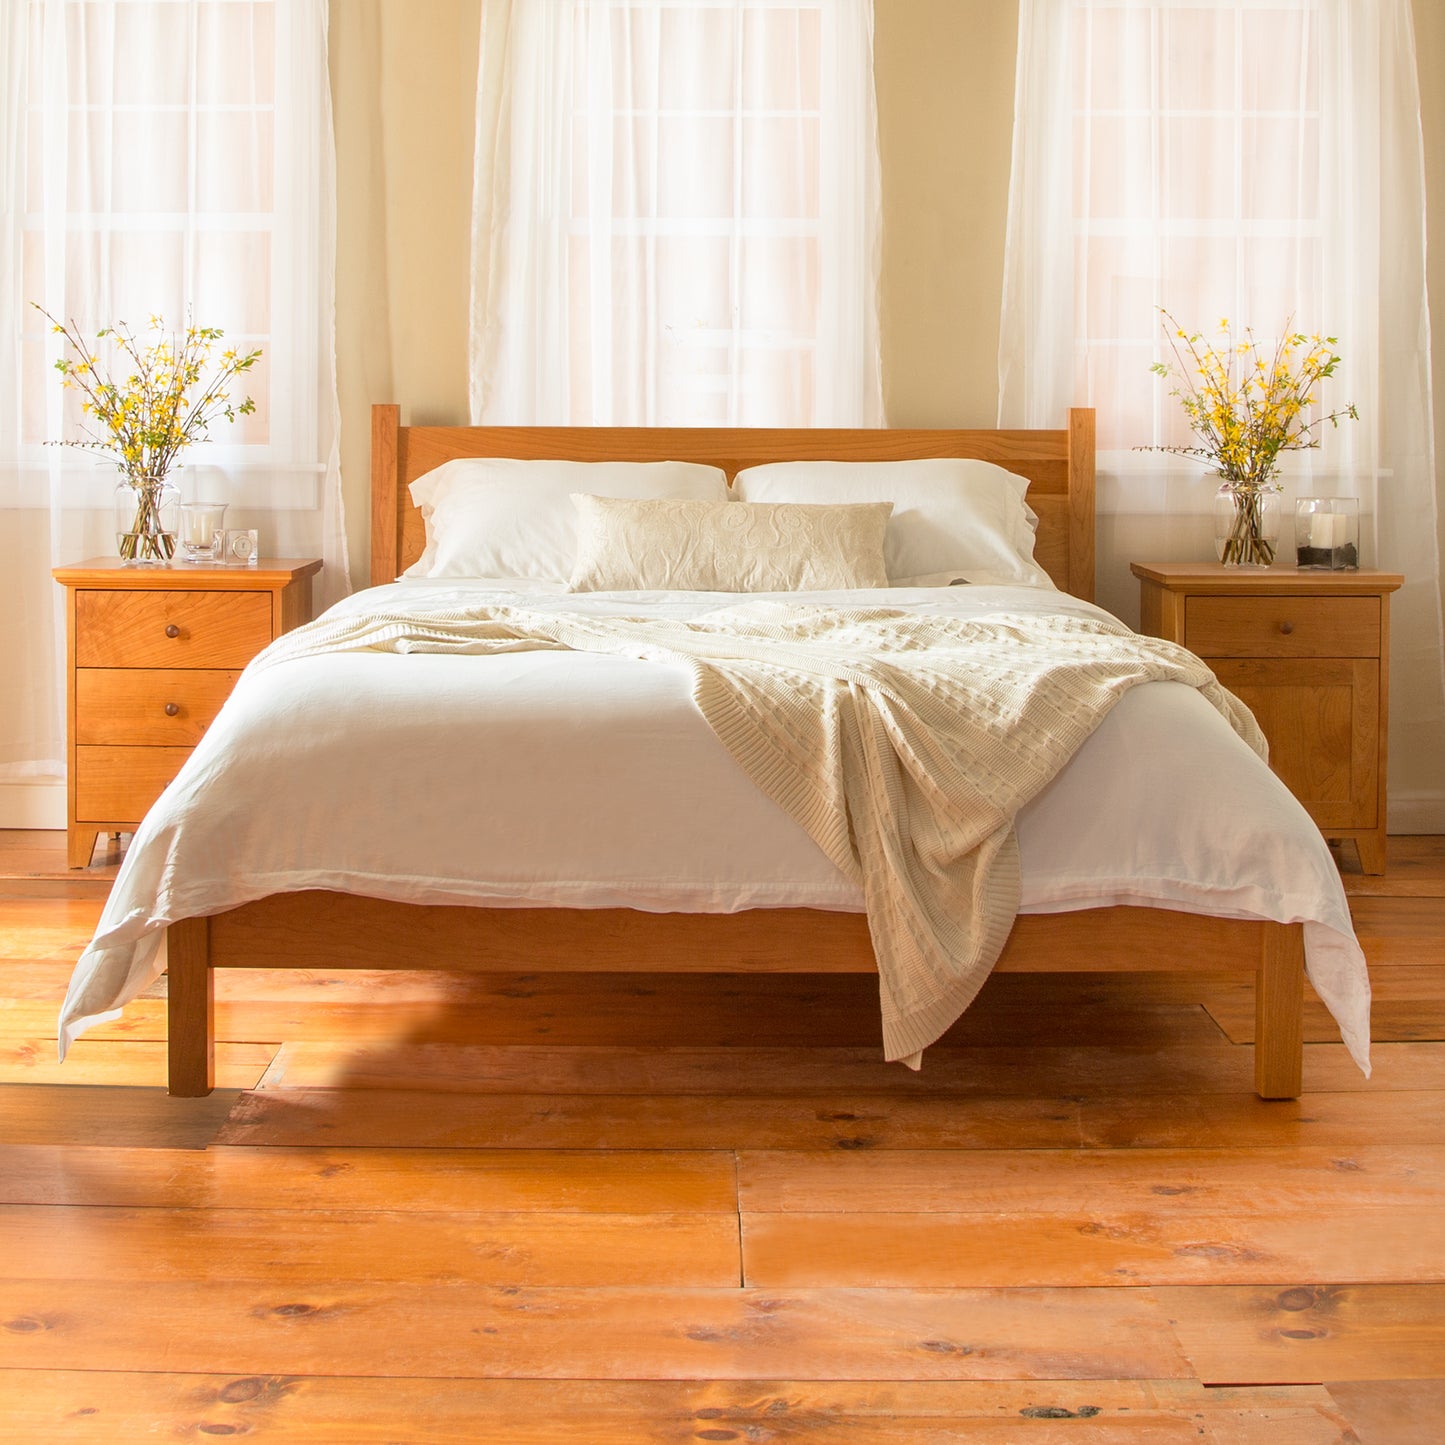 A sustainable wooden floor in a bedroom with Lyndon Furniture's Classic Wood Bed.